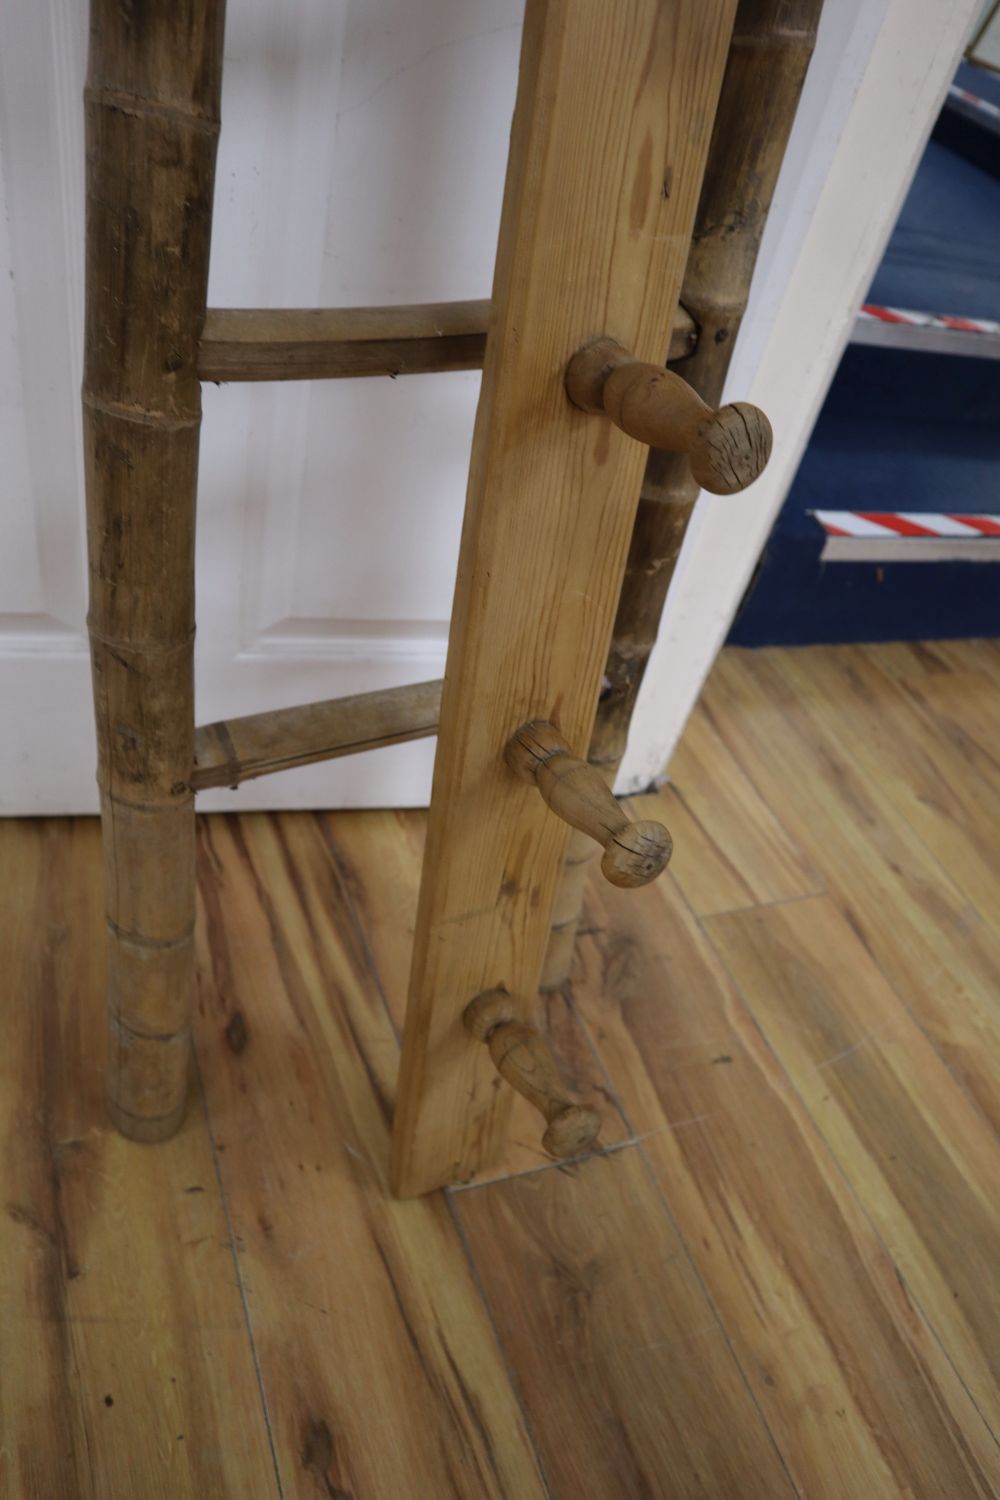 An unusual tapering bamboo seven tread step ladder, 6ft 6in., and a pine wall hanging coat rack